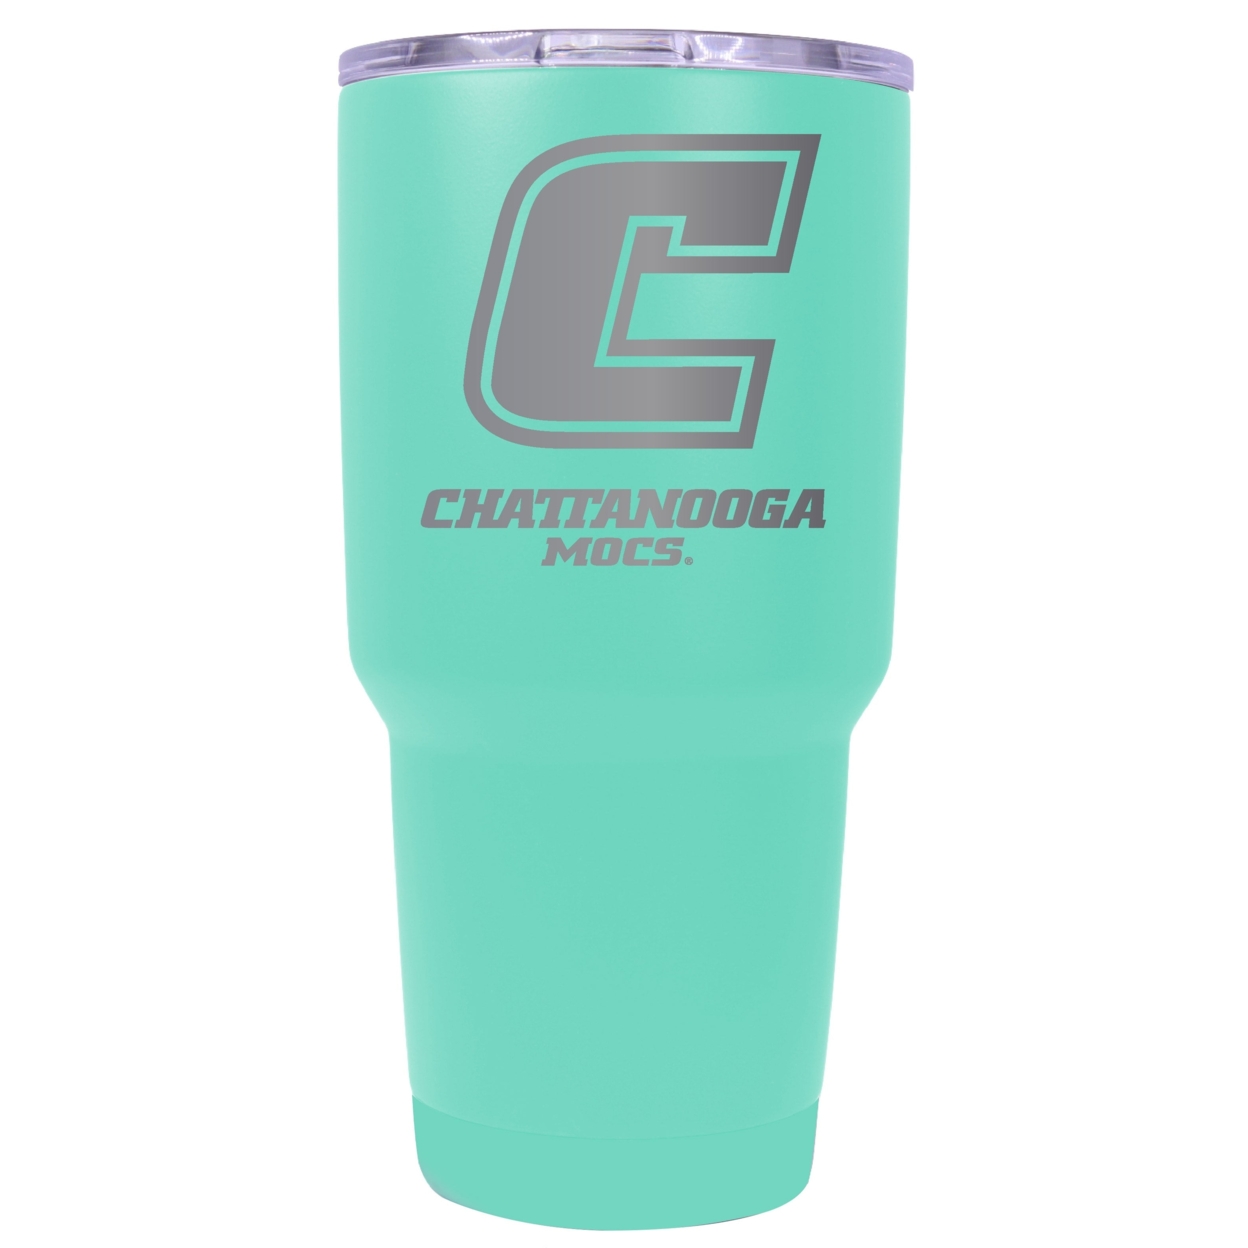 University Of Tennessee At Chattanooga 24 Oz Laser Engraved Stainless Steel Insulated Tumbler - Choose Your Color. - Seafoam